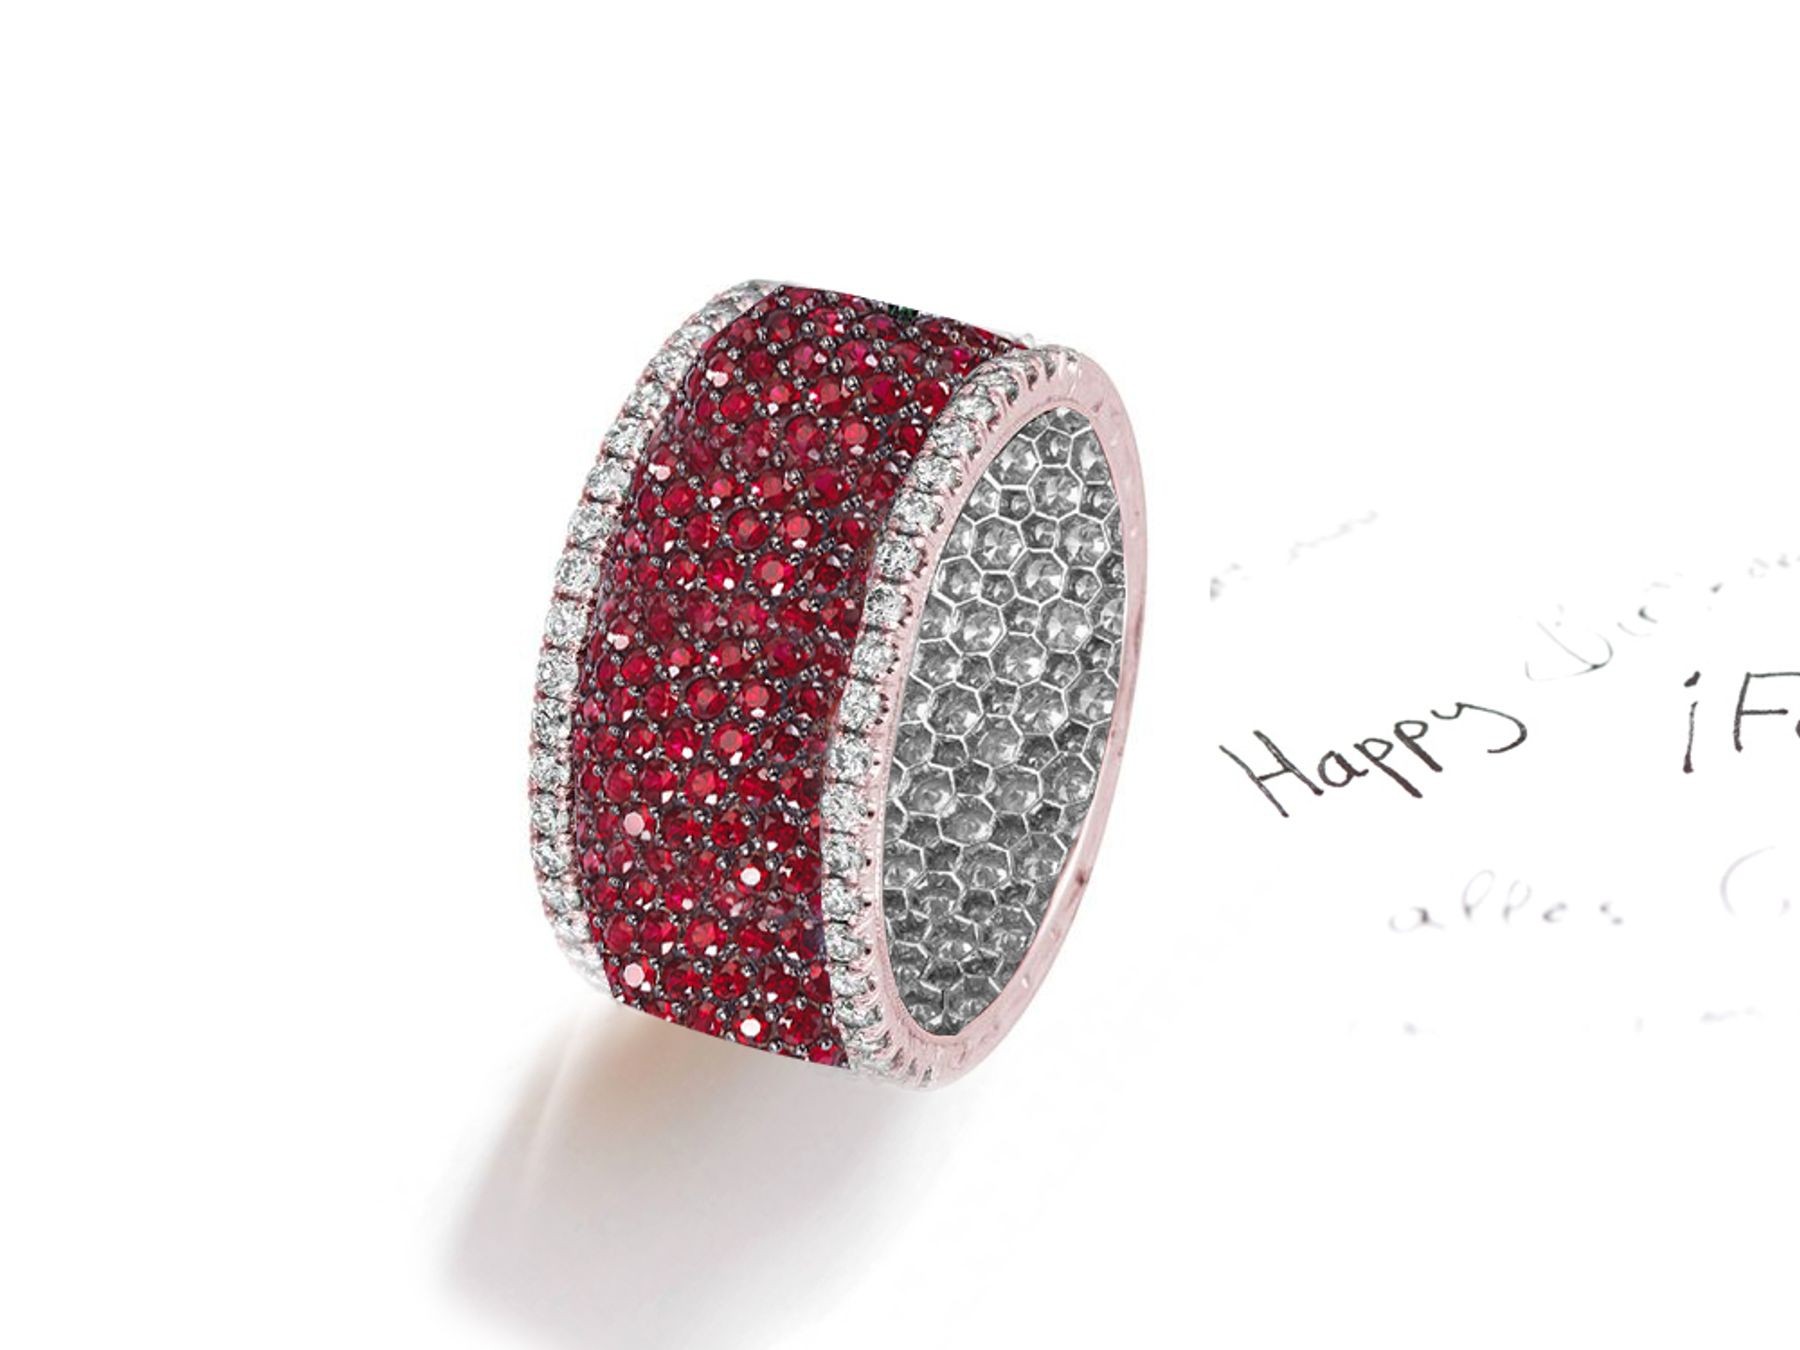 Made to Order French pave Set Brilliant Cut Round Diamonds & Pink SapphireRed Rubies Eternity Rings & Bands